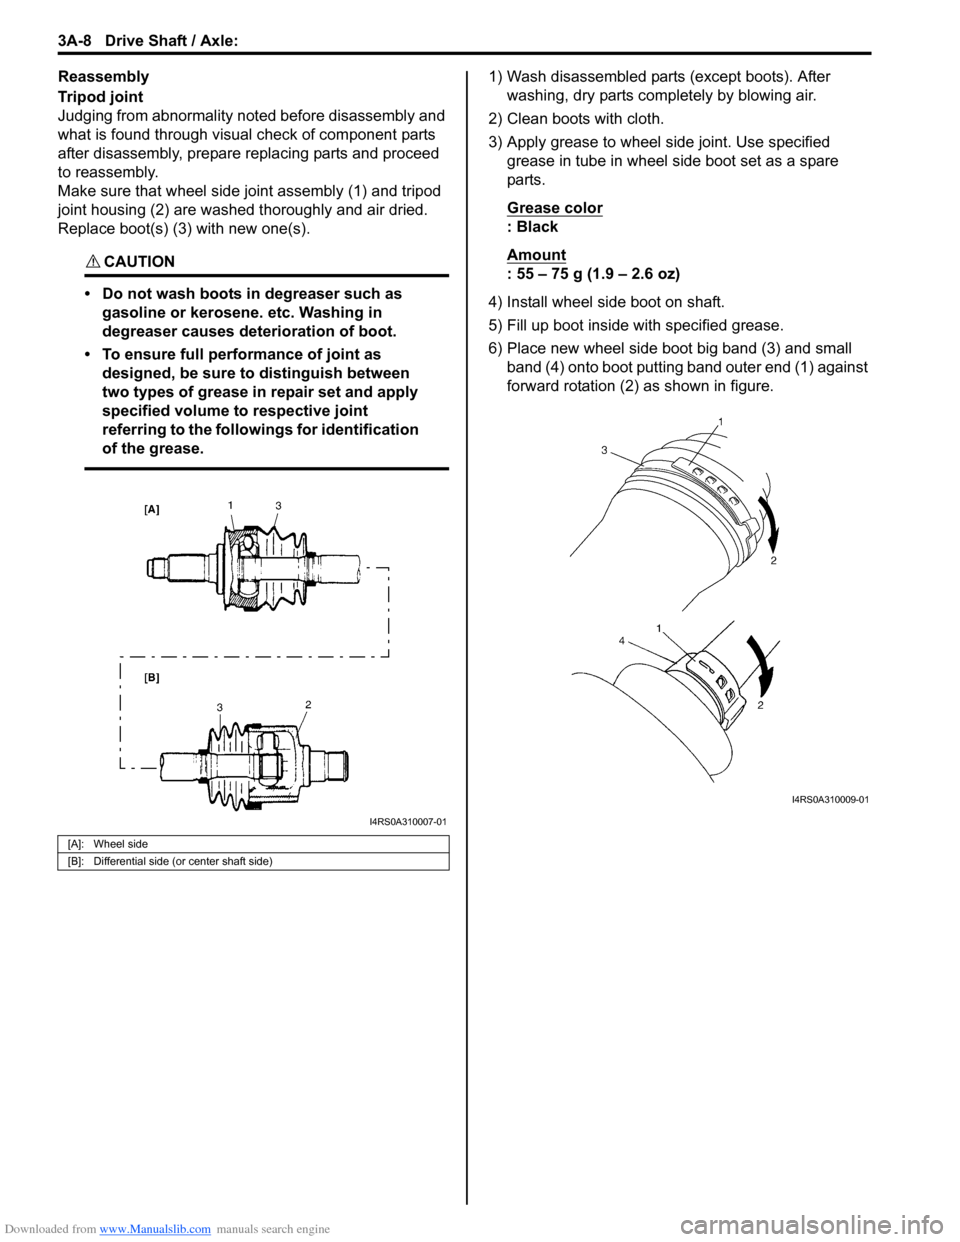 SUZUKI SWIFT 2007 2.G Service Workshop Manual Downloaded from www.Manualslib.com manuals search engine 3A-8 Drive Shaft / Axle: 
Reassembly
Tripod joint
Judging from abnormality noted before disassembly and 
what is found through visual check of 